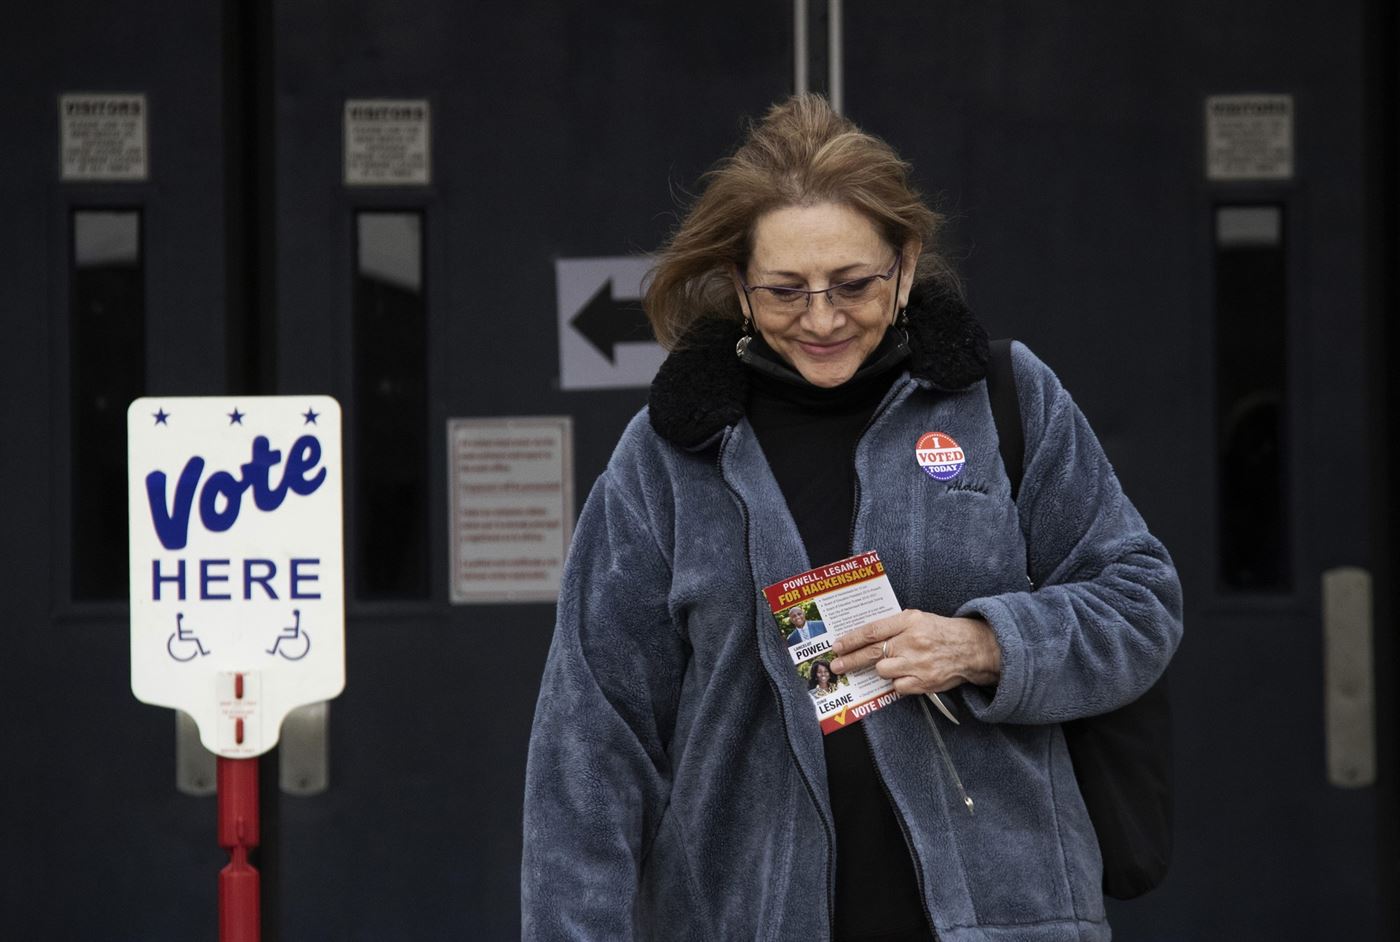 Hackensack resident leaves the polling place in Hackensack, New Jersey with a smile on Election Day. Day. Michelle Coneo | The Montclarion